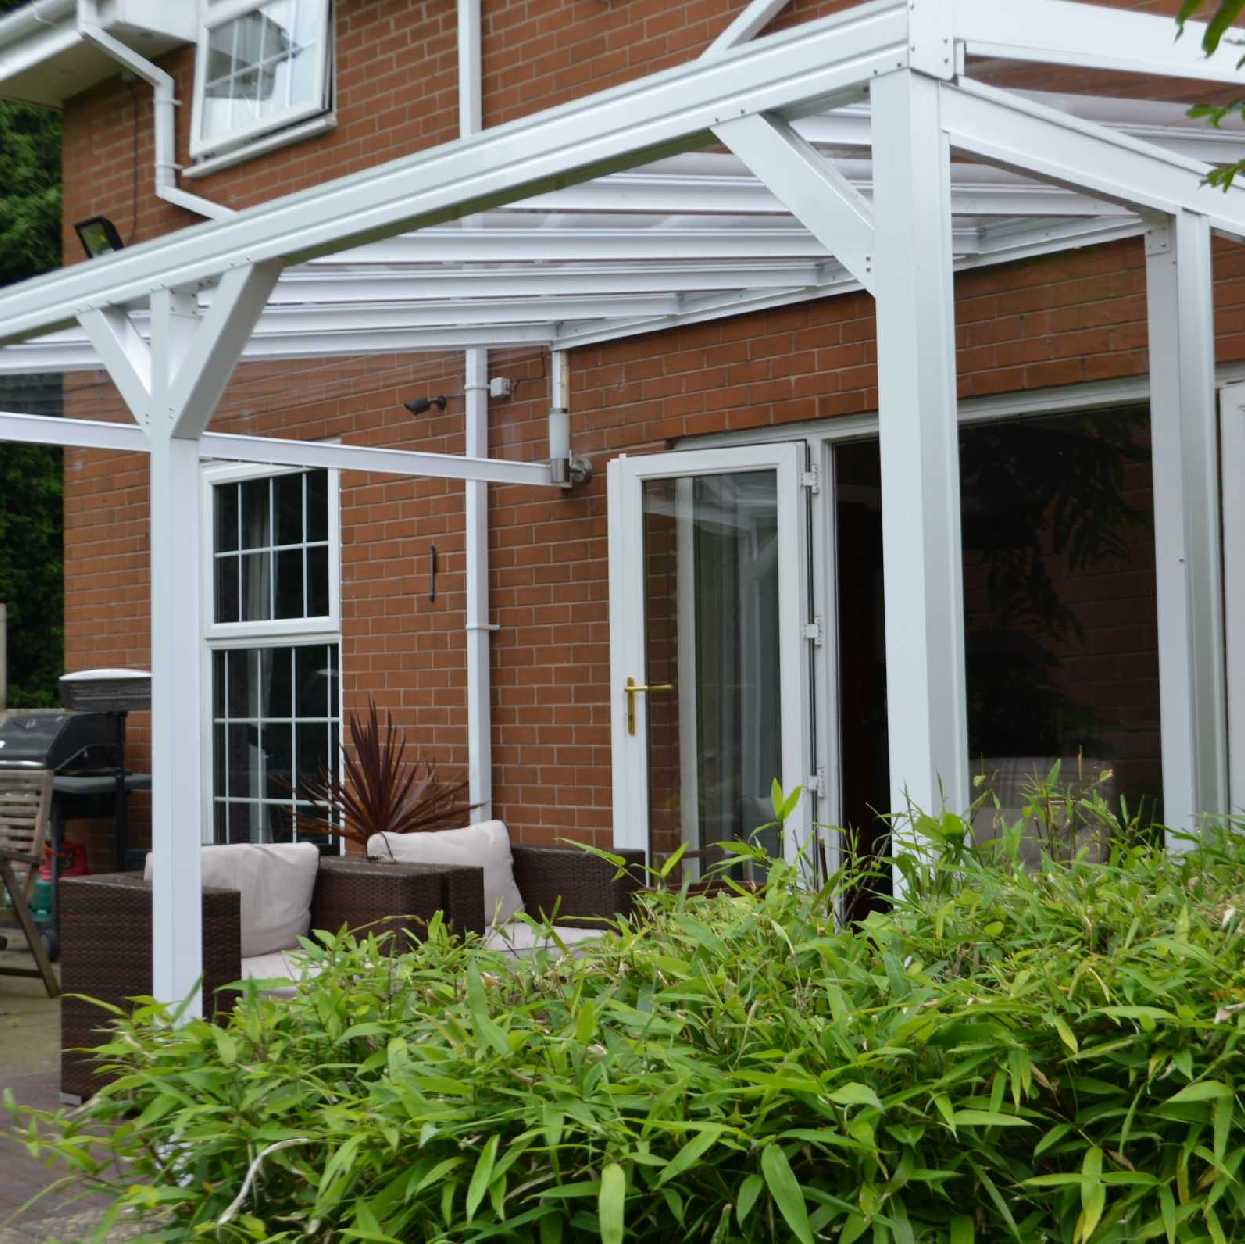 Omega Smart Lean-To Canopy, White with 6mm Glass Clear Plate Polycarbonate Glazing - 9.1m (W) x 3.0m (P), (5) Supporting Posts from Omega Build